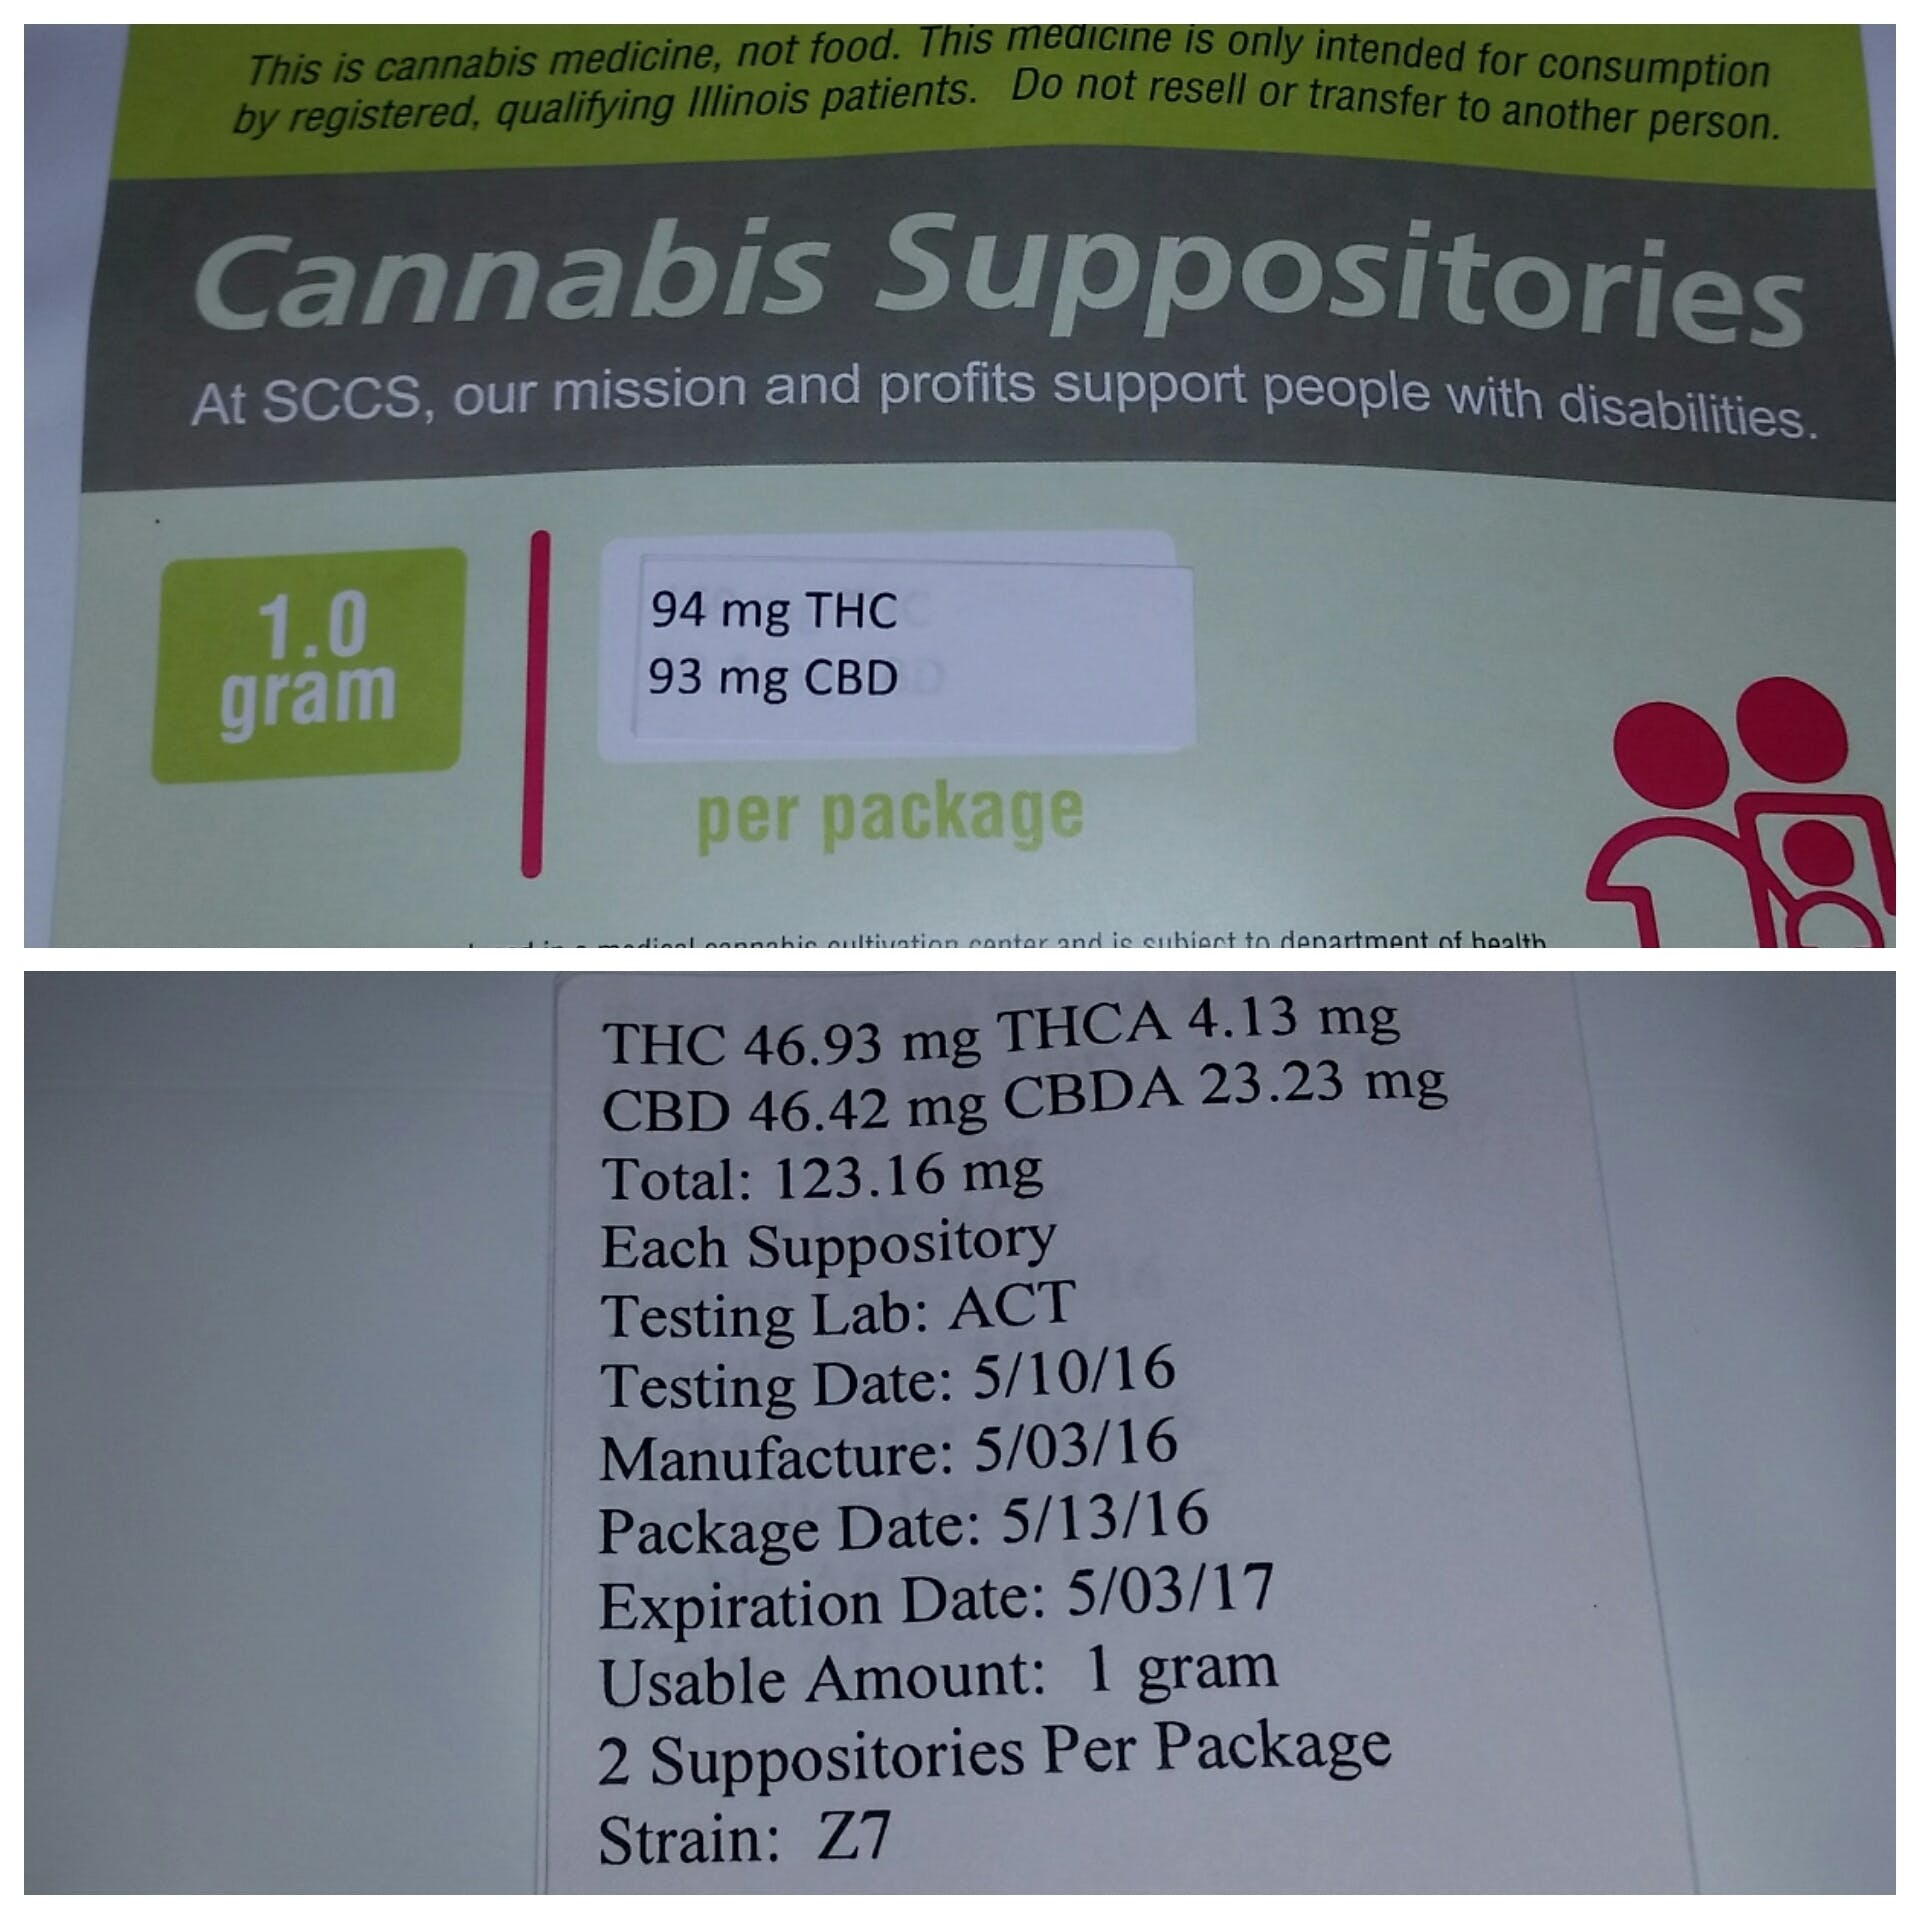 SCCS Cannabis Suppositories